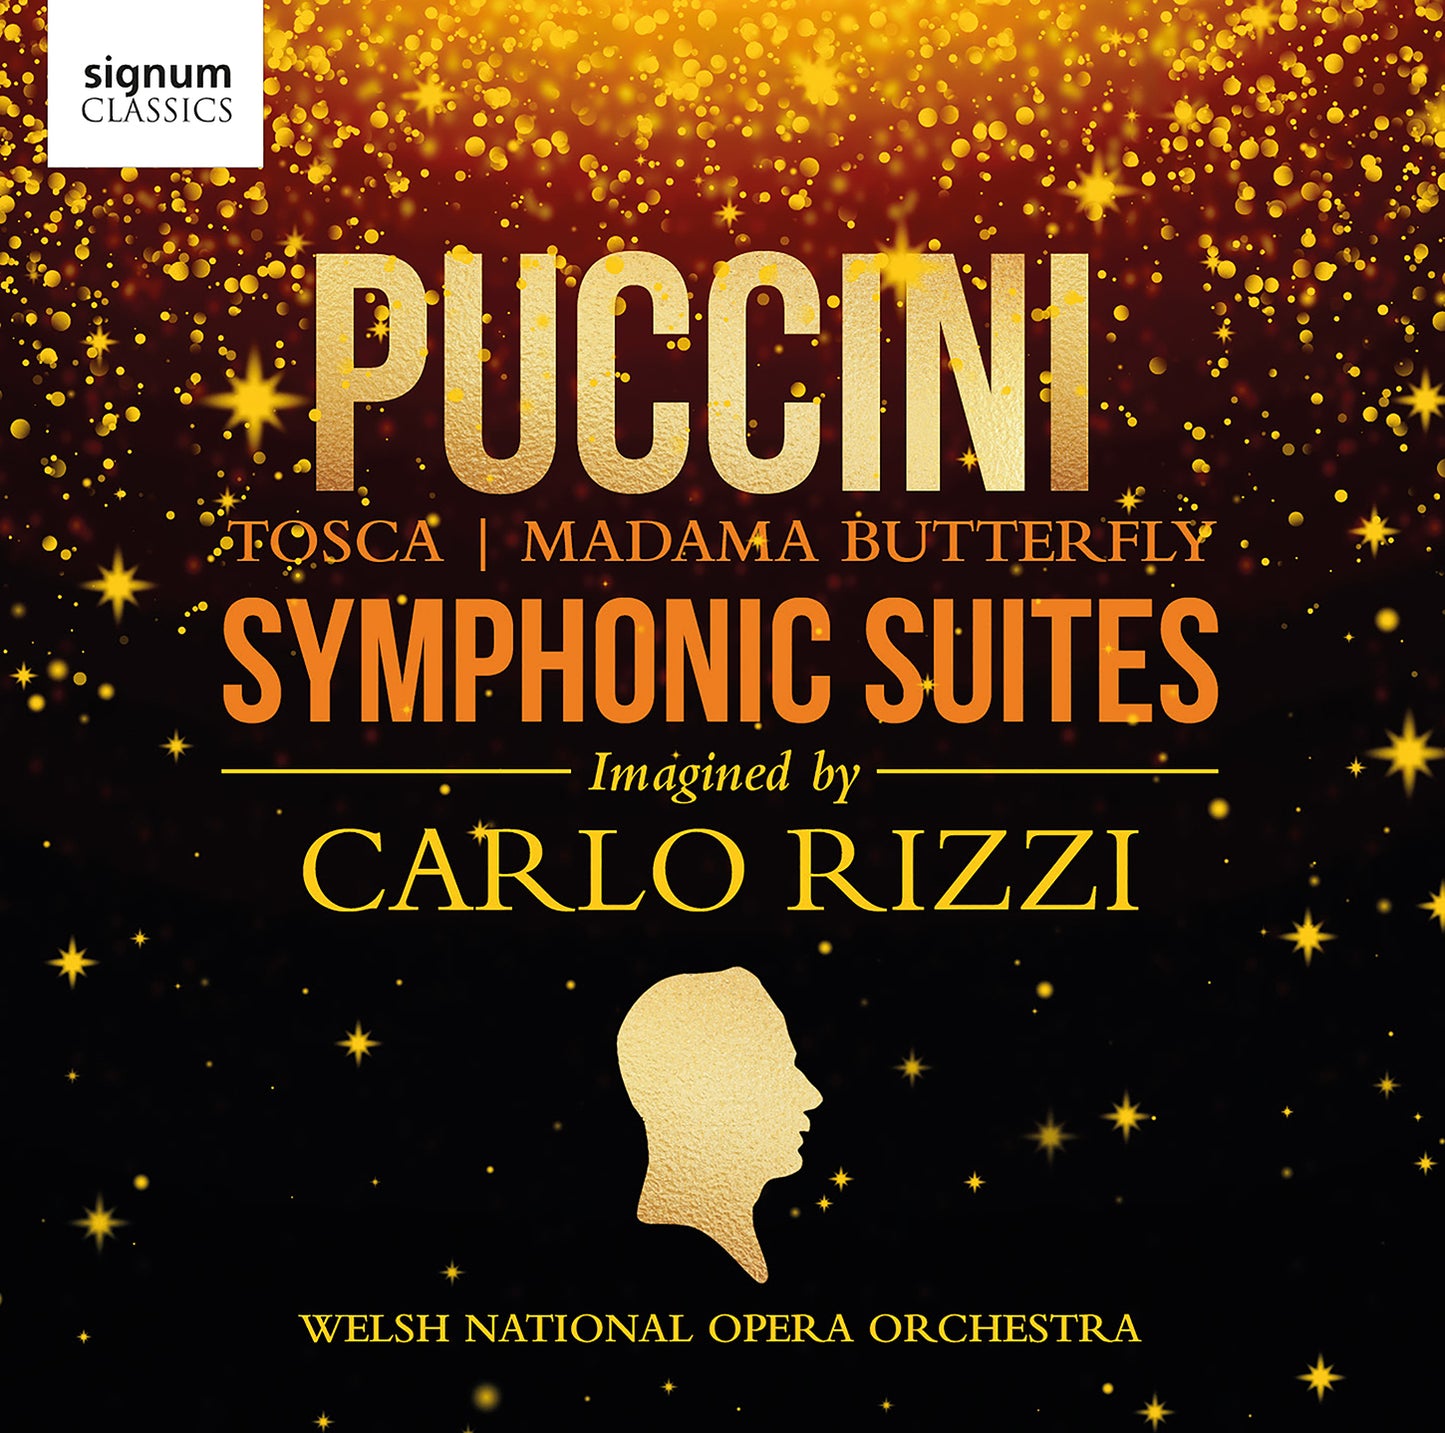 Puccini: Symphonic Suites / Welsh National Opera Orchestra